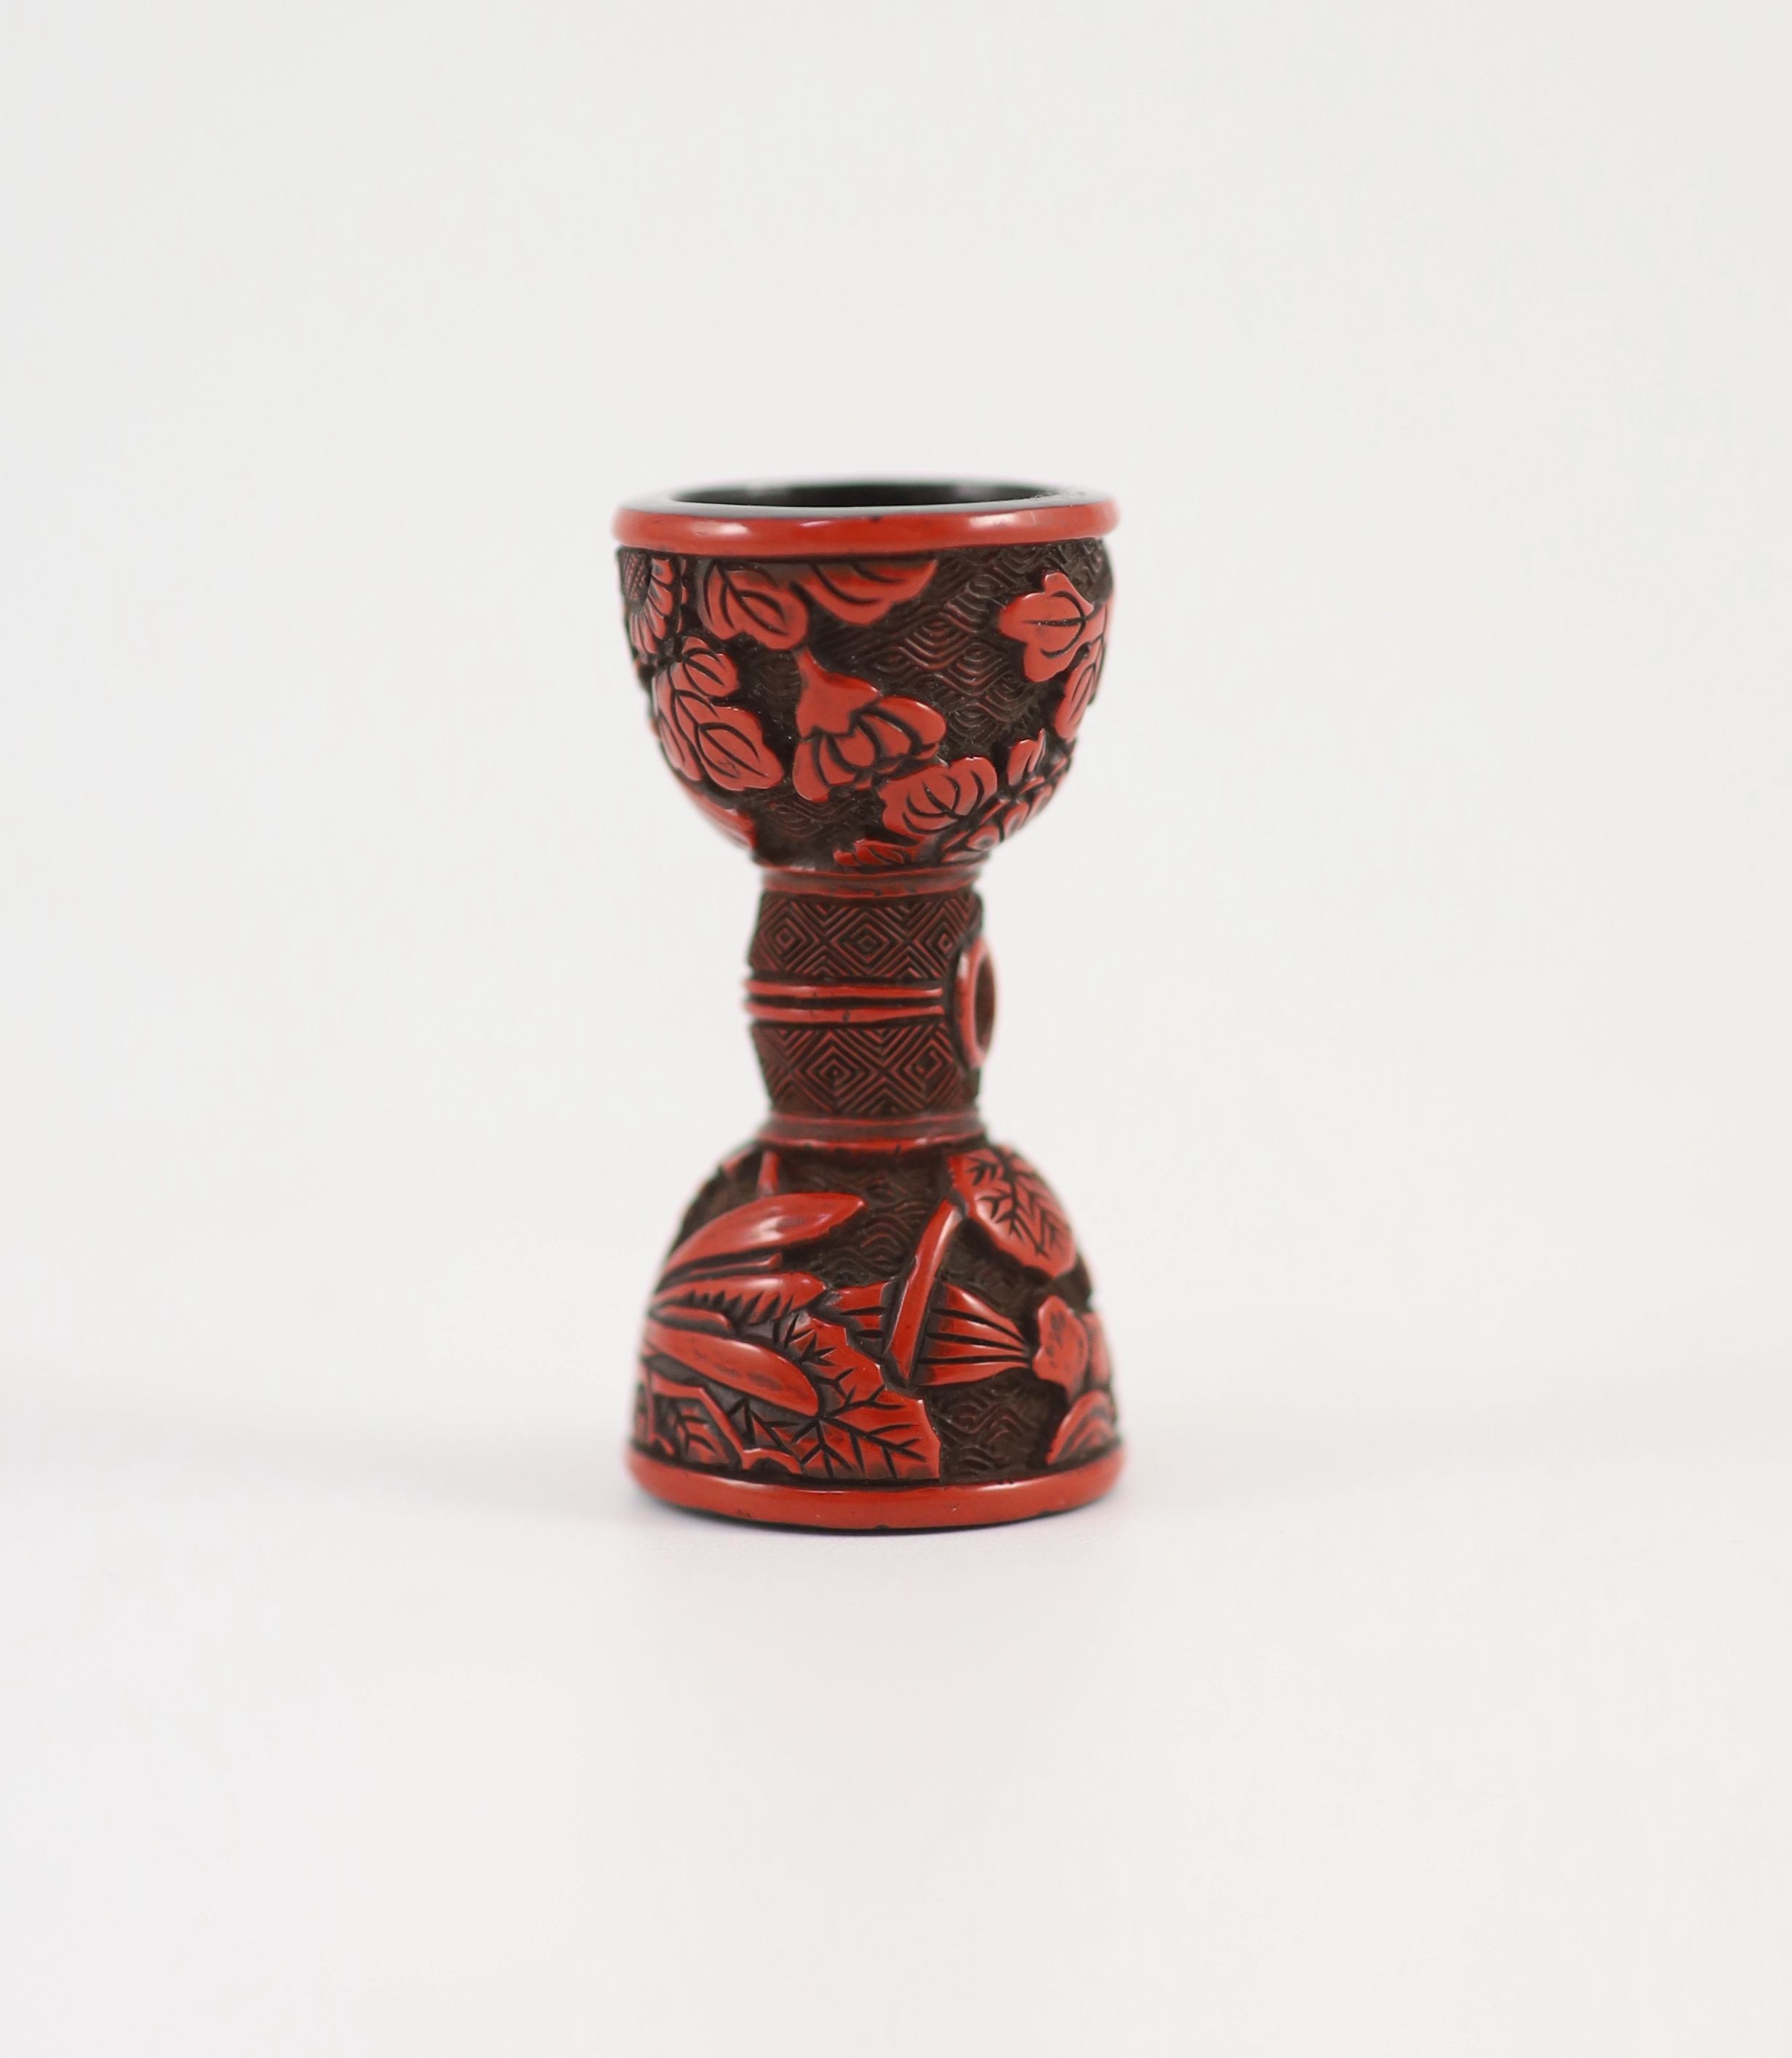 A Japanese red lacquer netsuke in the form of a hand drum (tsuzumi), early 19th century, 4.5 cm